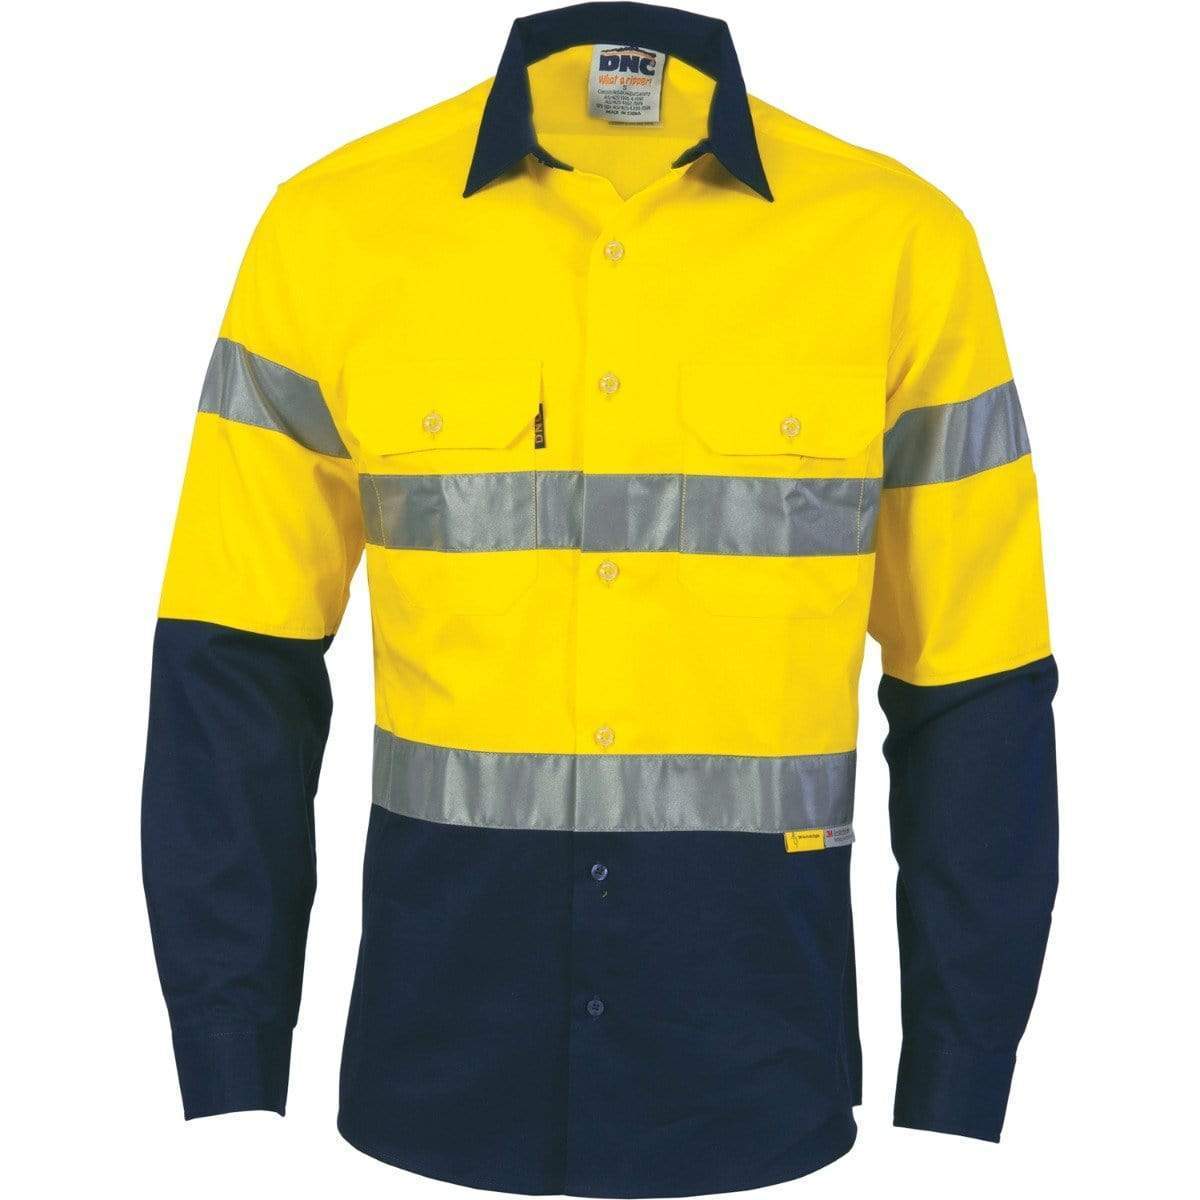 Dnc Workwear Hi-vis Two-tone Drill Long Sleeve Shirts With 3m 8906 Reflective Tape - 3736 Work Wear DNC Workwear Yellow/Navy XS 